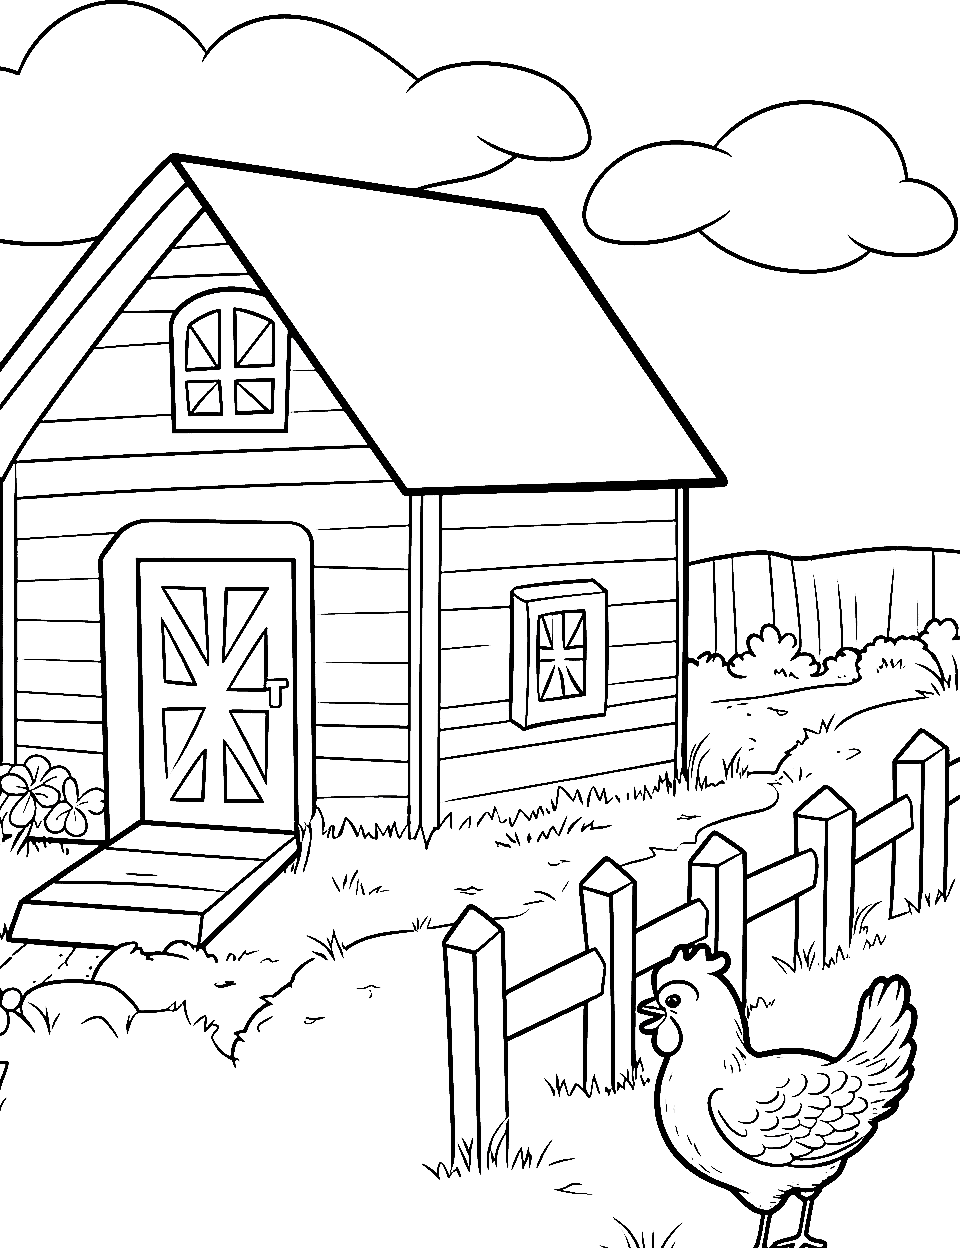 Barnyard Fun Coloring Page - A barn house with a rooster outside.